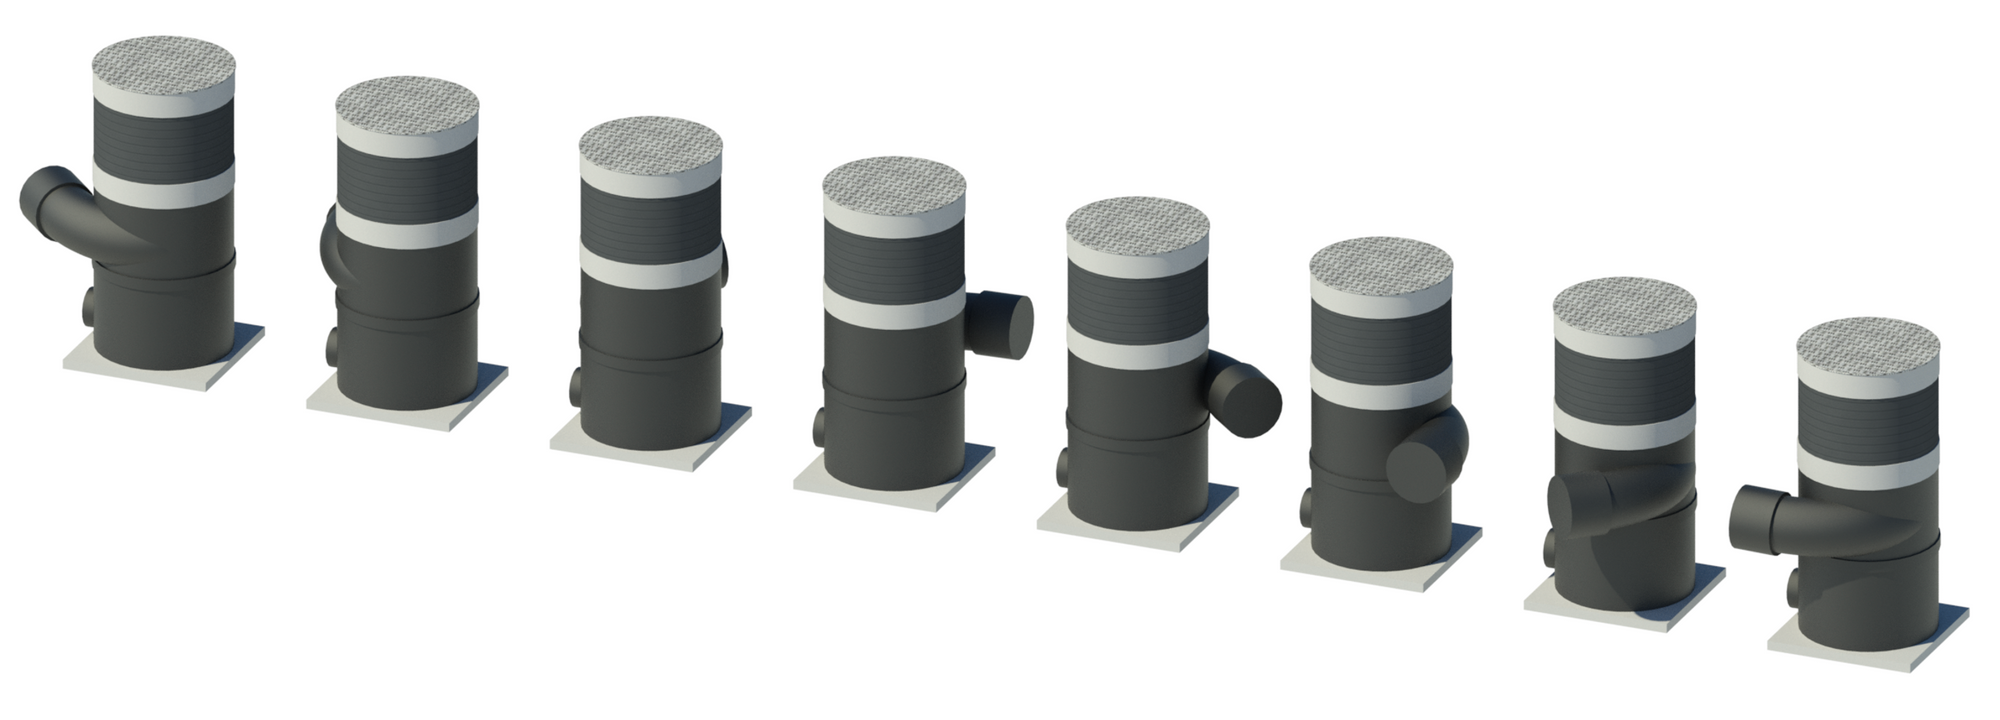 Render showing array of water filters with variable inlet connection azimuth.